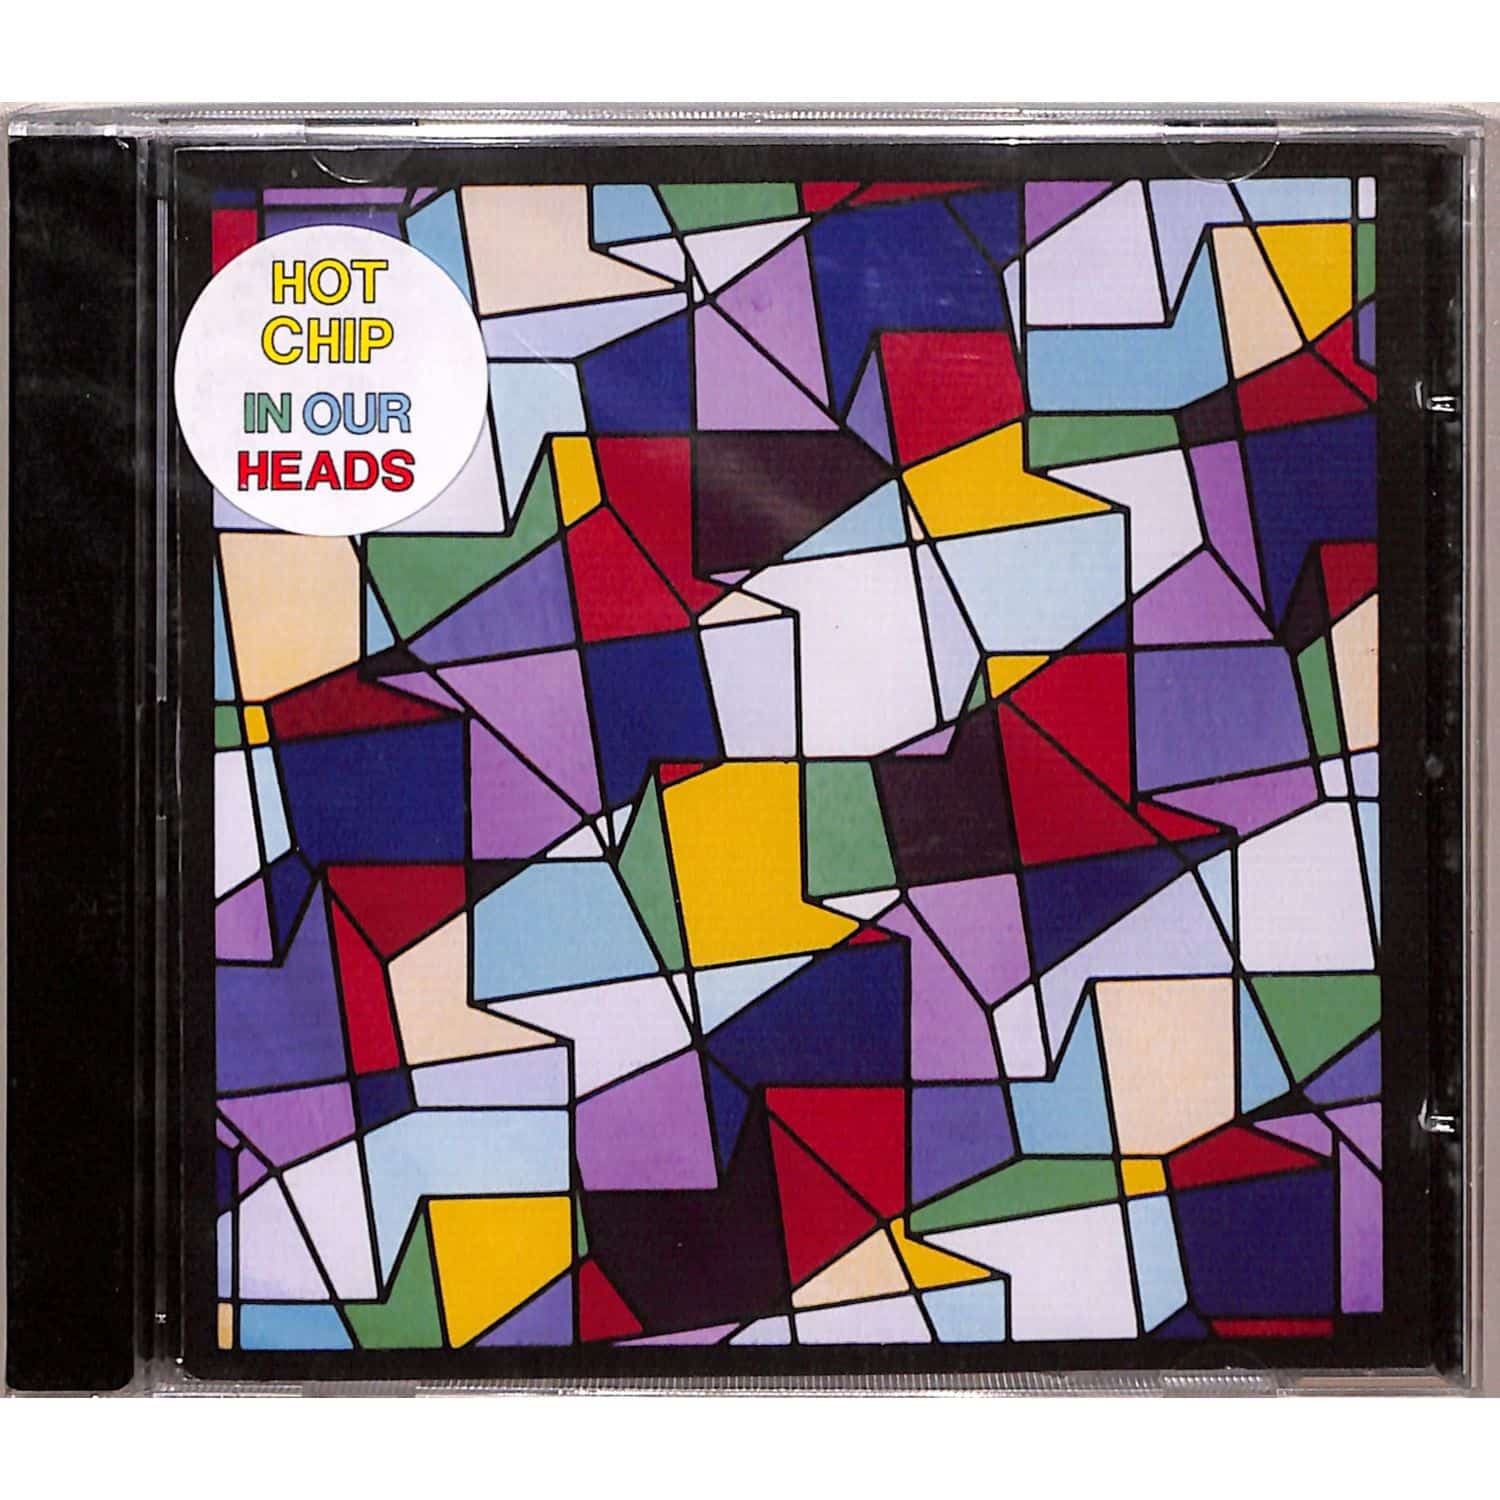 Hot Chip - IN OUR HEADS 